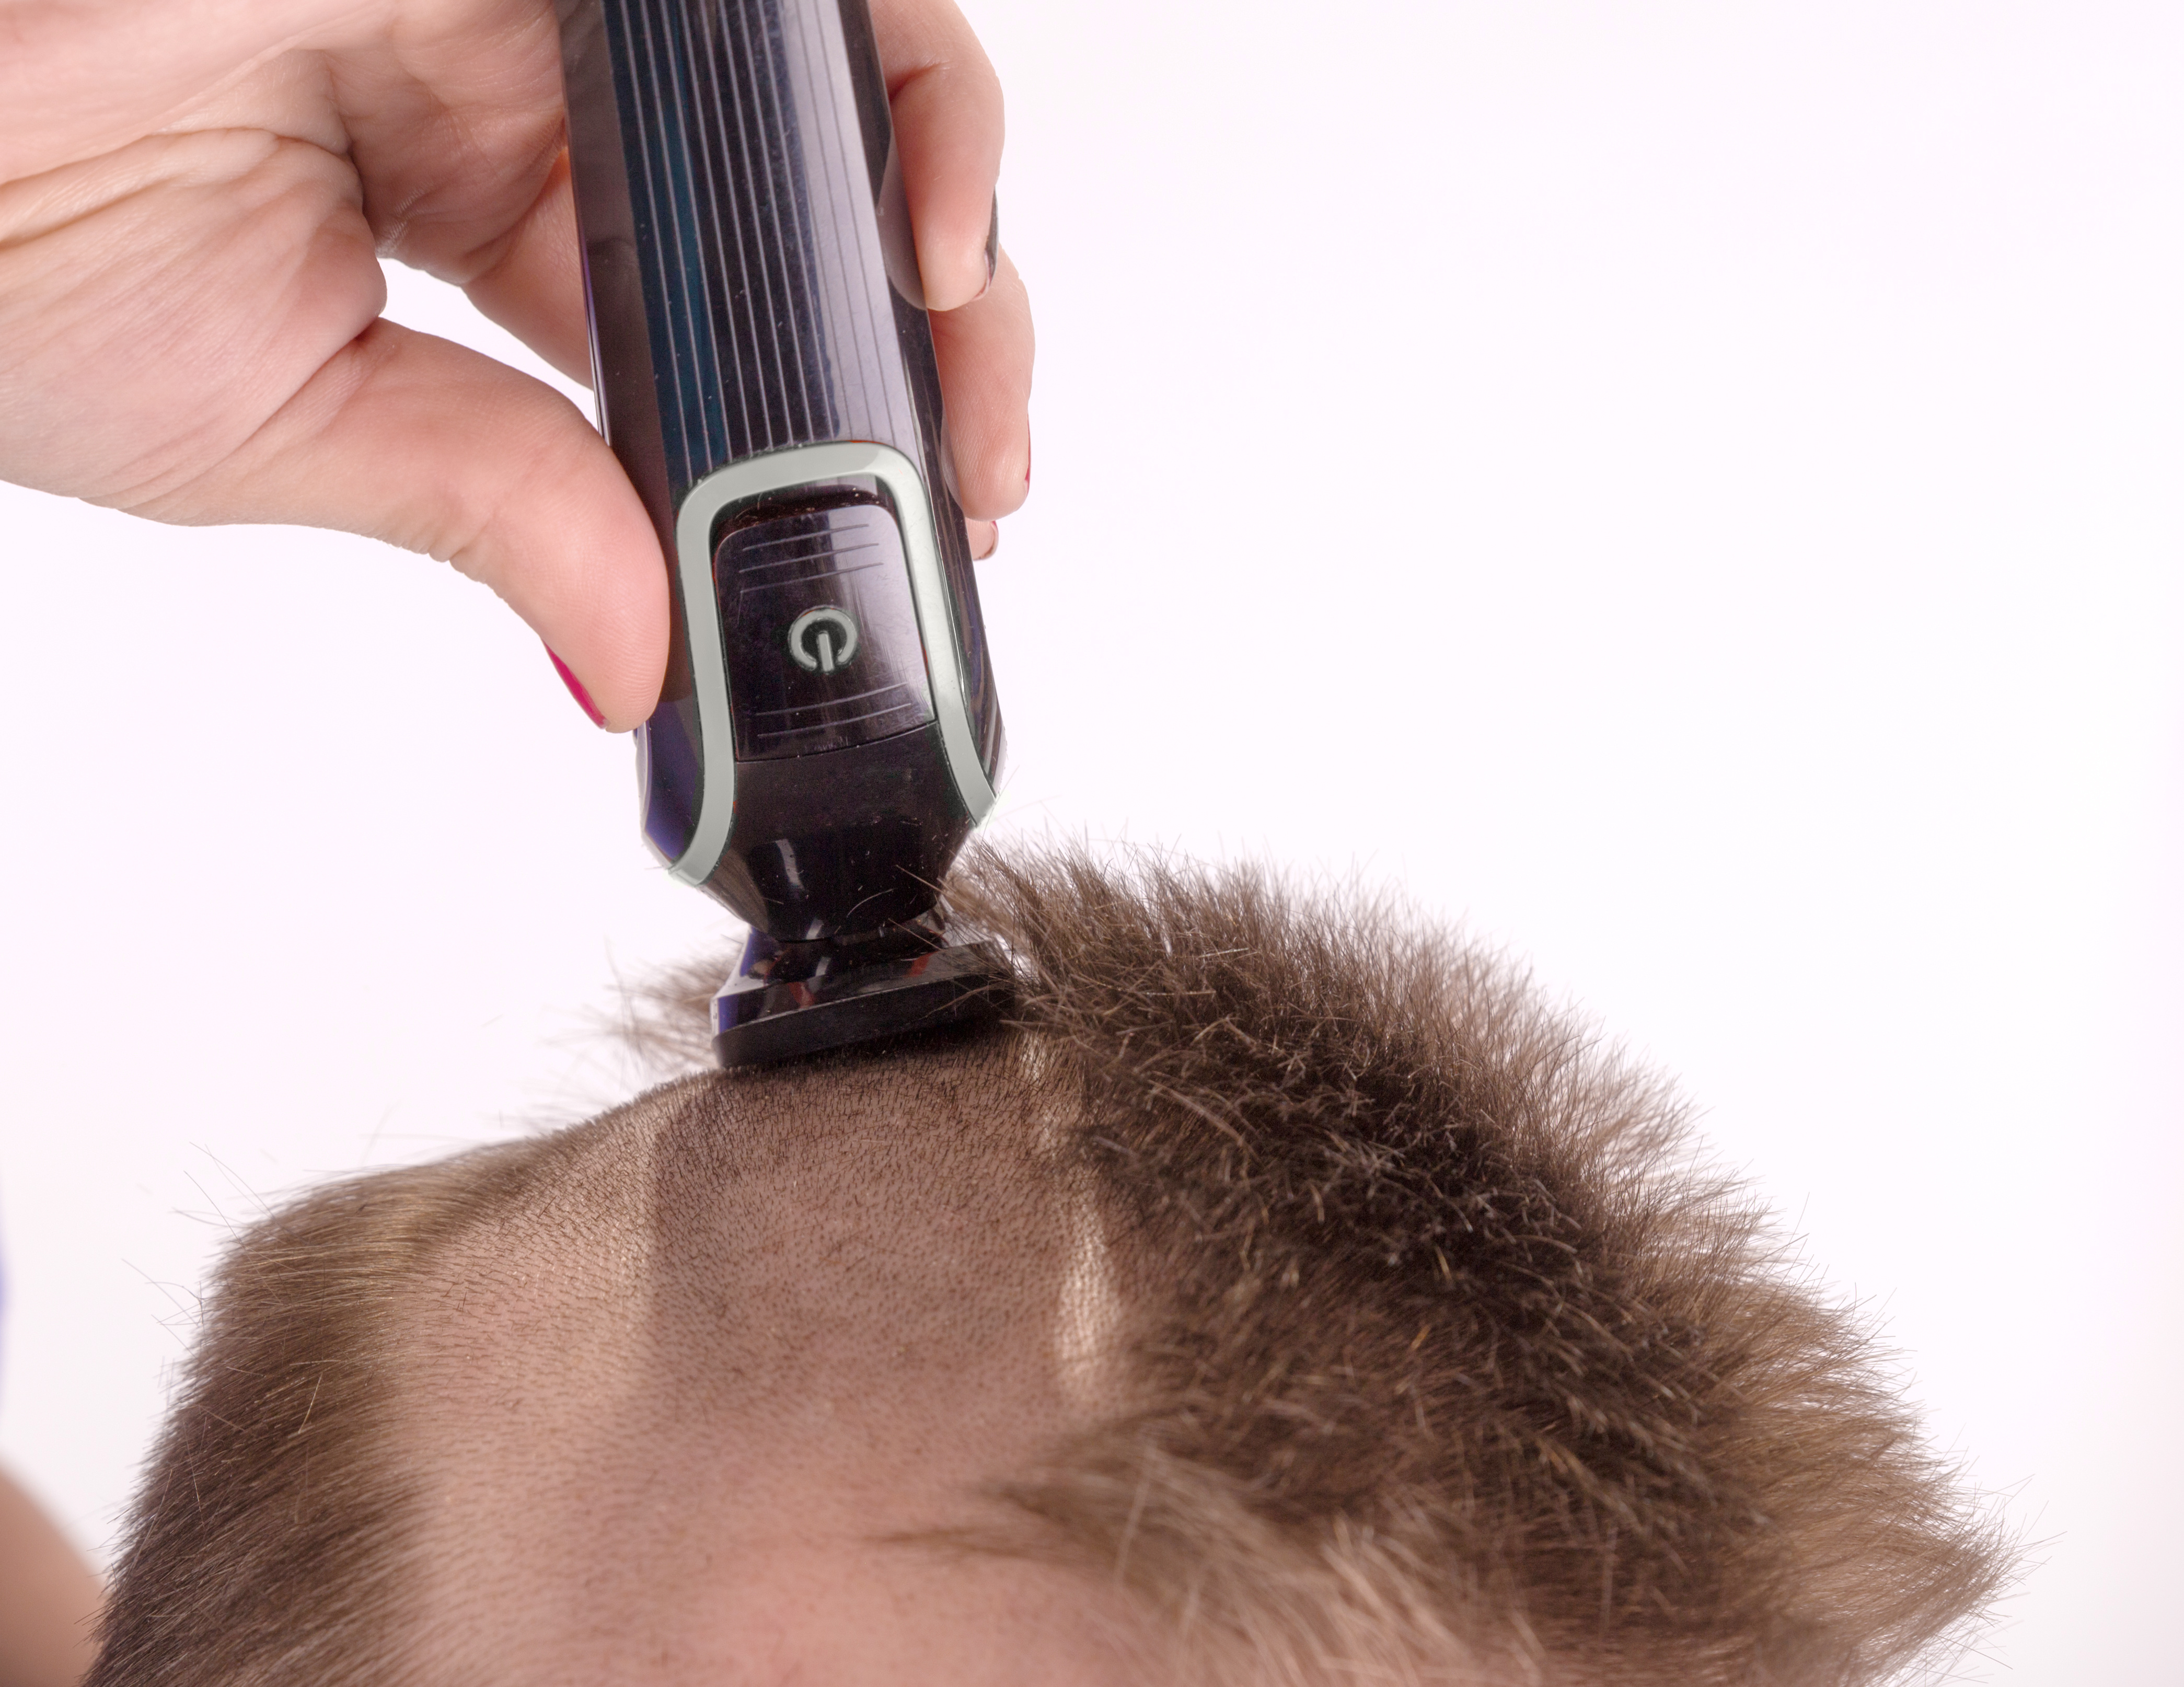 Check Out the Five Caring Steps to Upkeep Your Shaving Head.